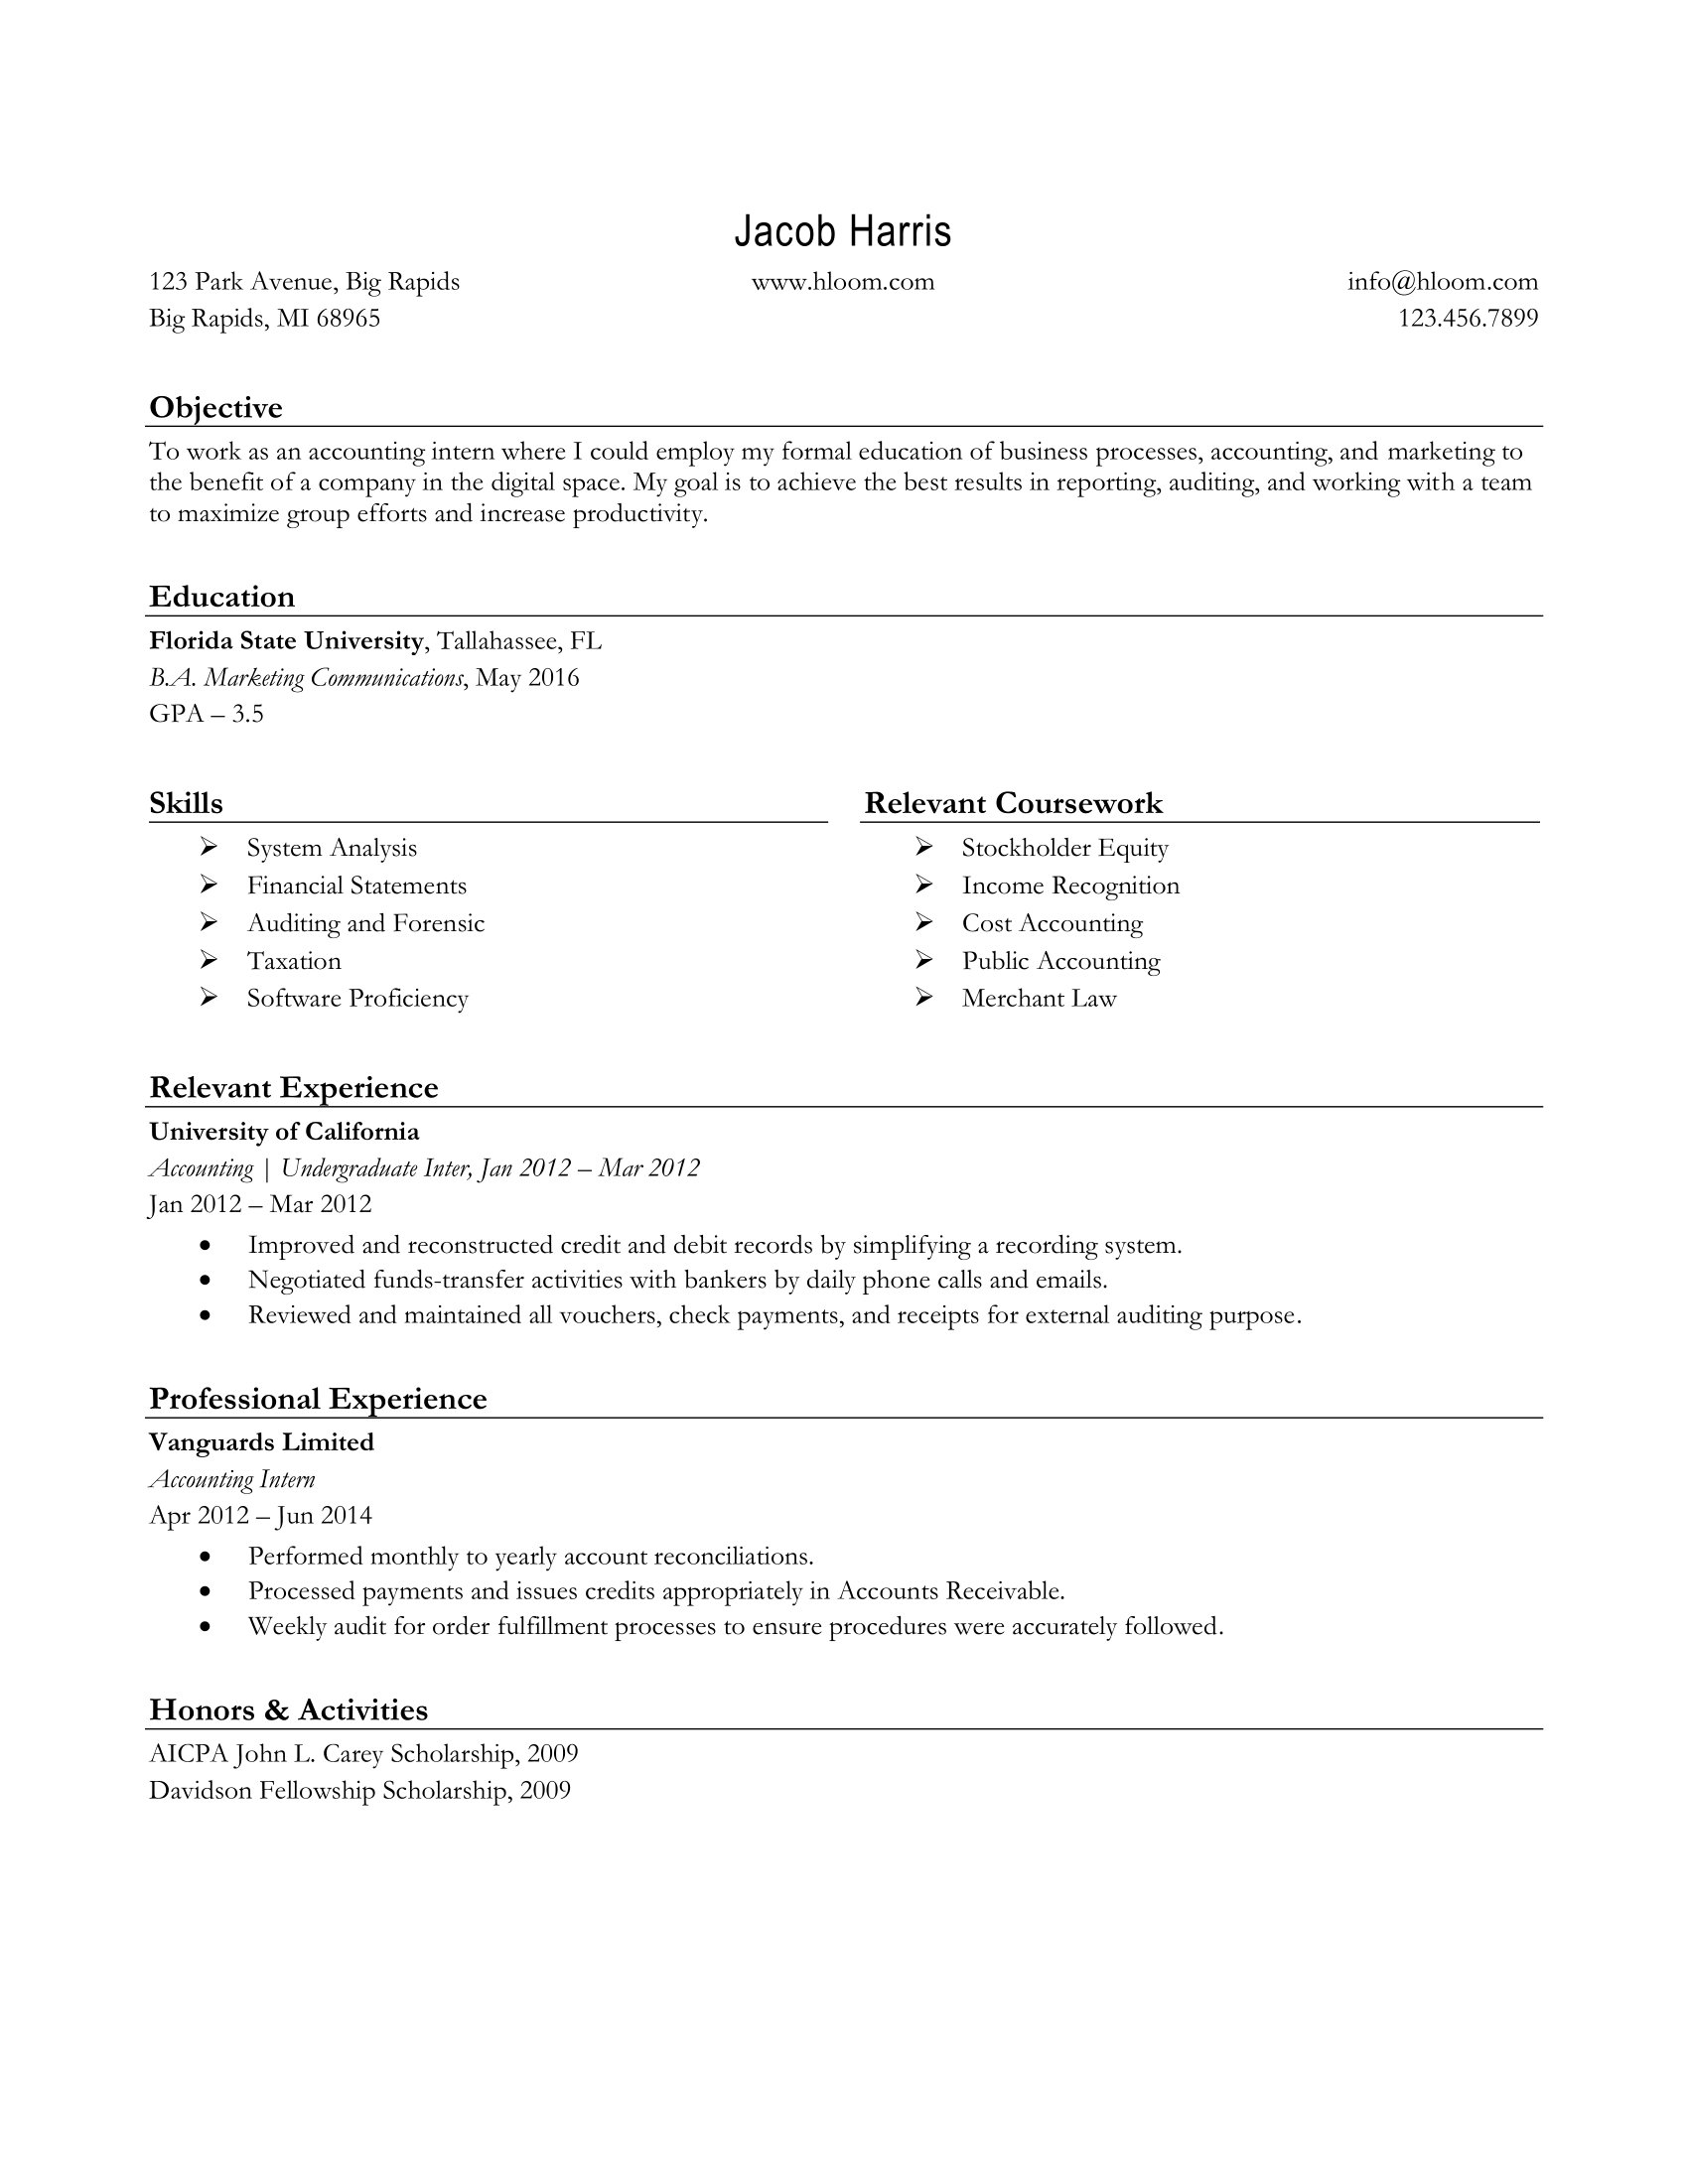 Accounting Student Resume Sample from www.hloom.com